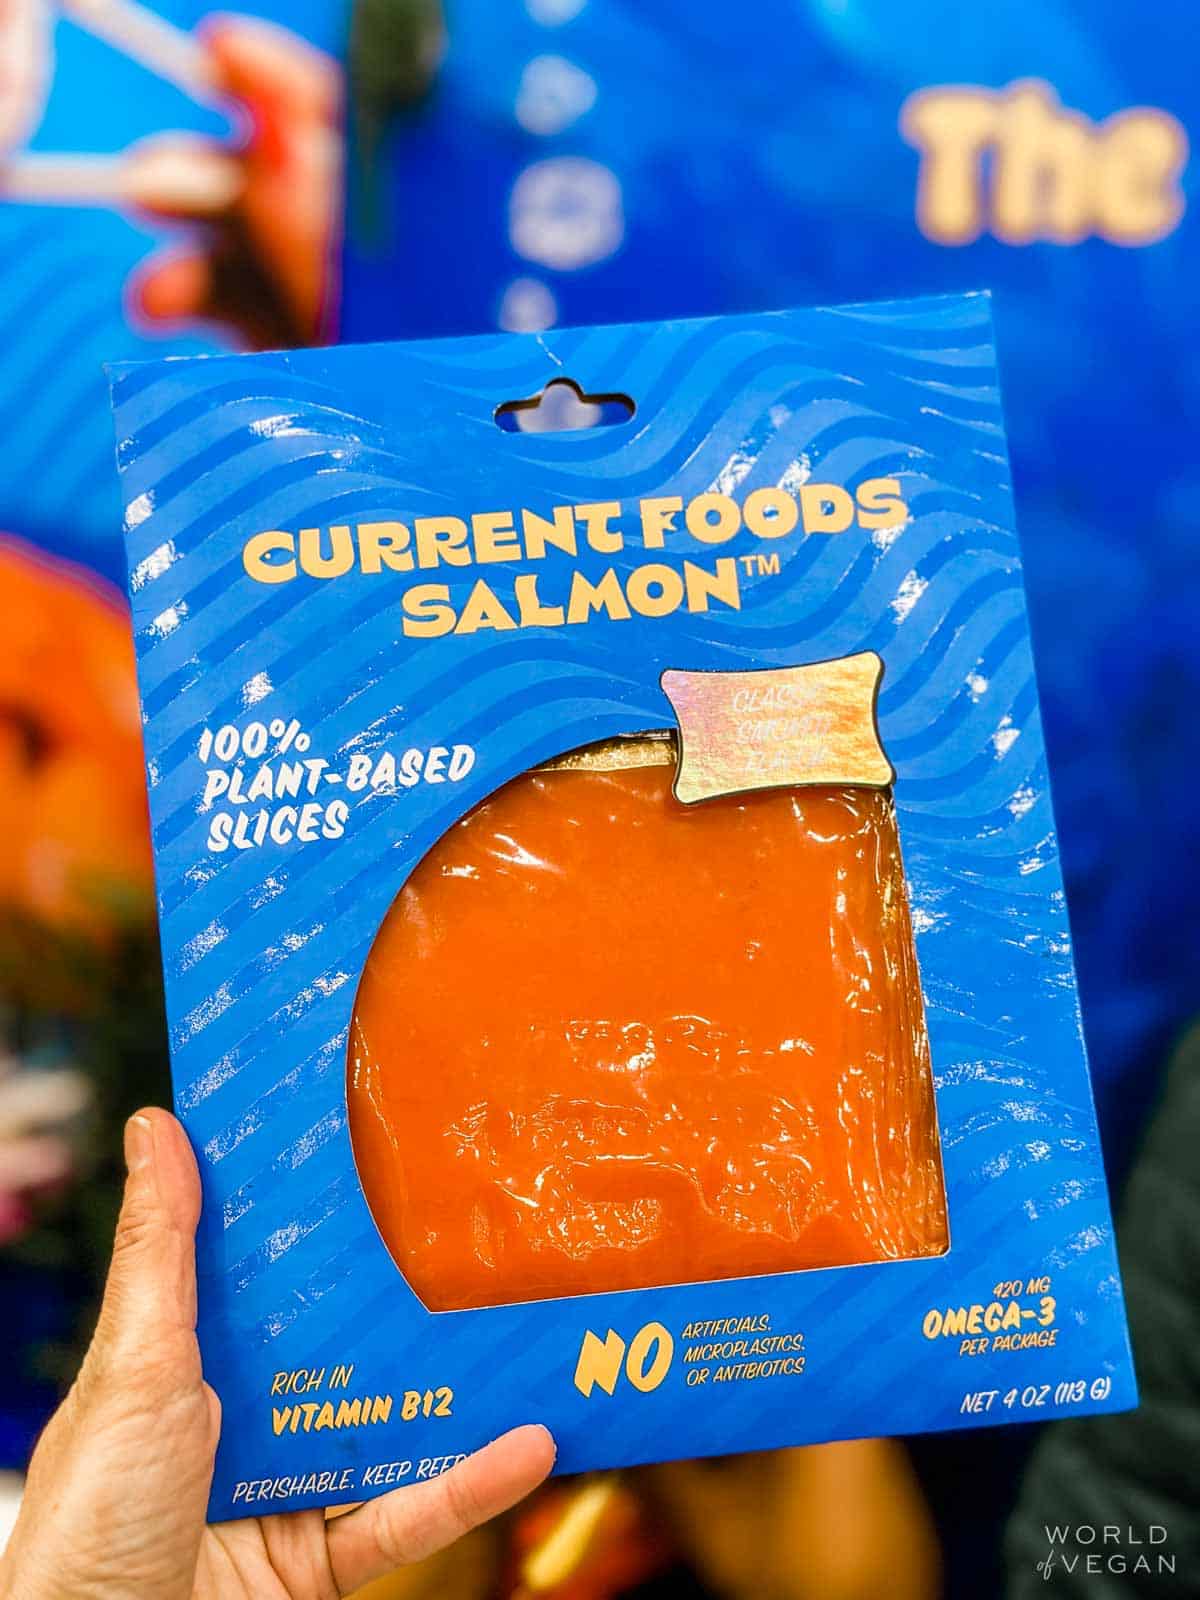 A package of Current Foods brand vegan salmon slices.